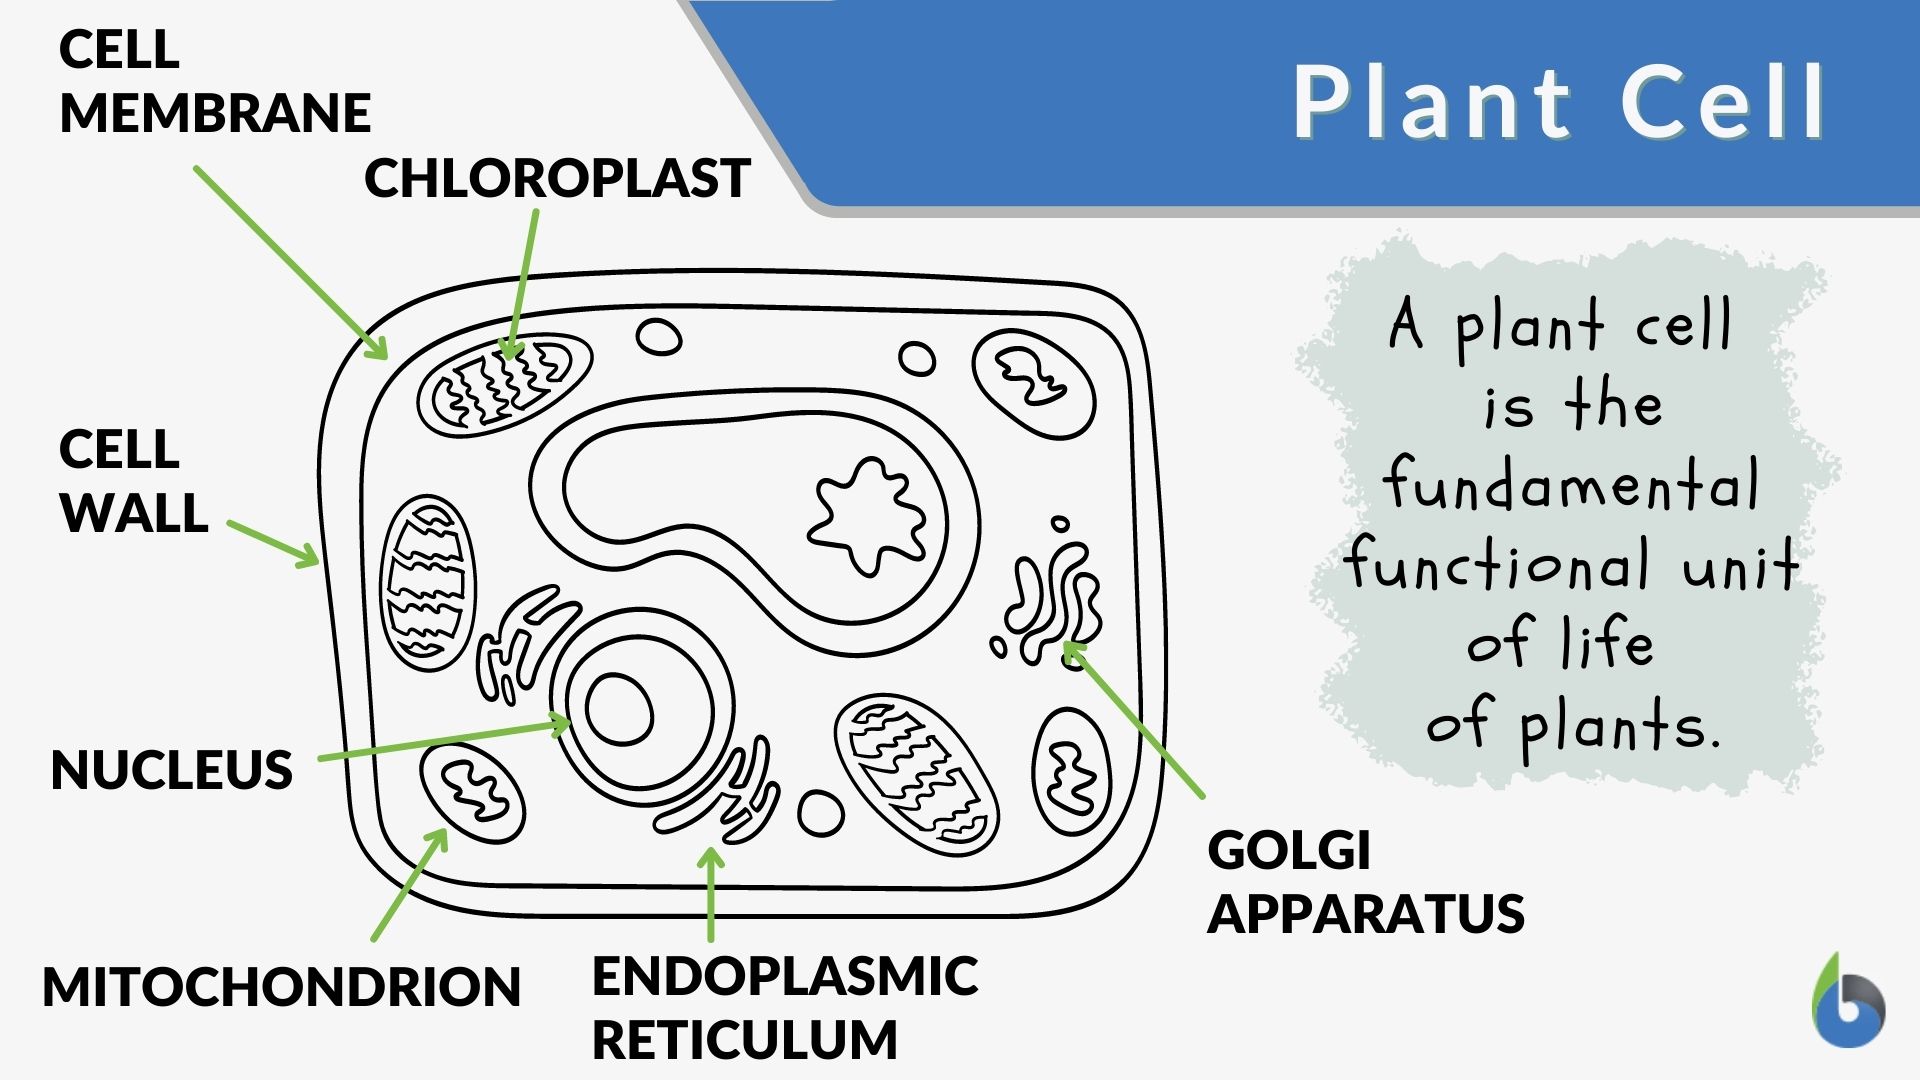 Plant cell - Definition and Examples - Biology Online Dictionary Regarding Plant Cell Worksheet Answers